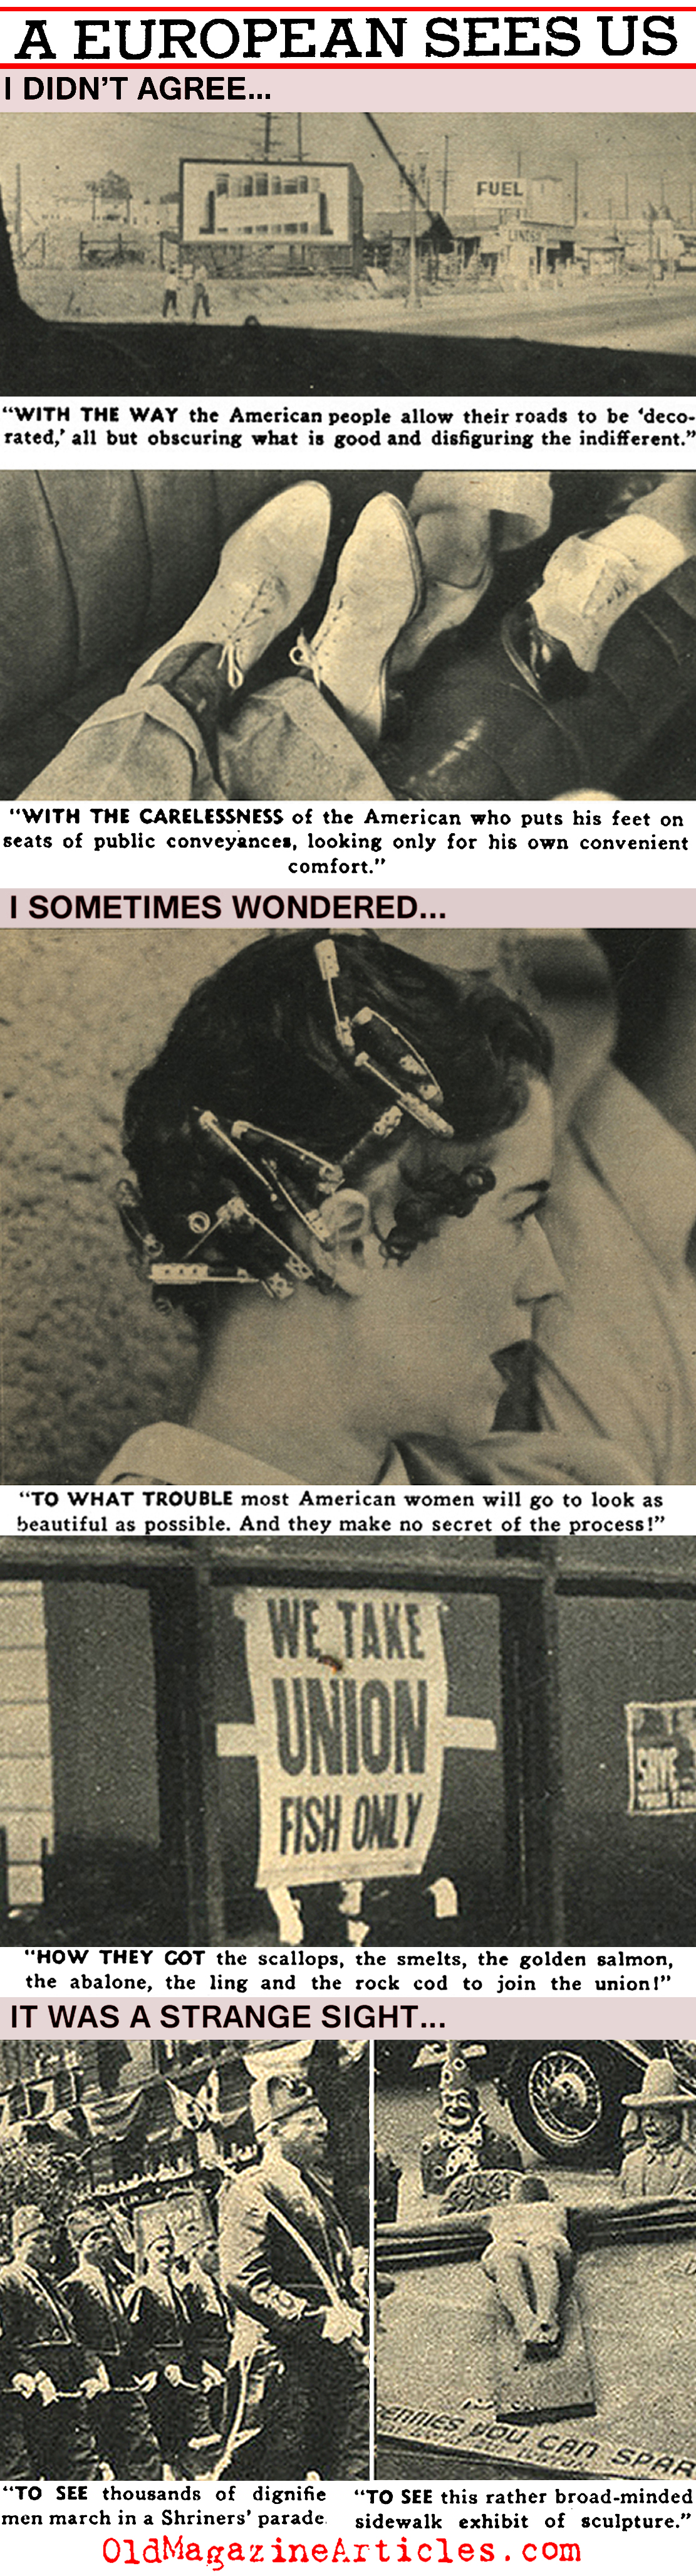 A Foreigner's View of 1930s America (Focus Magazine, 1938)